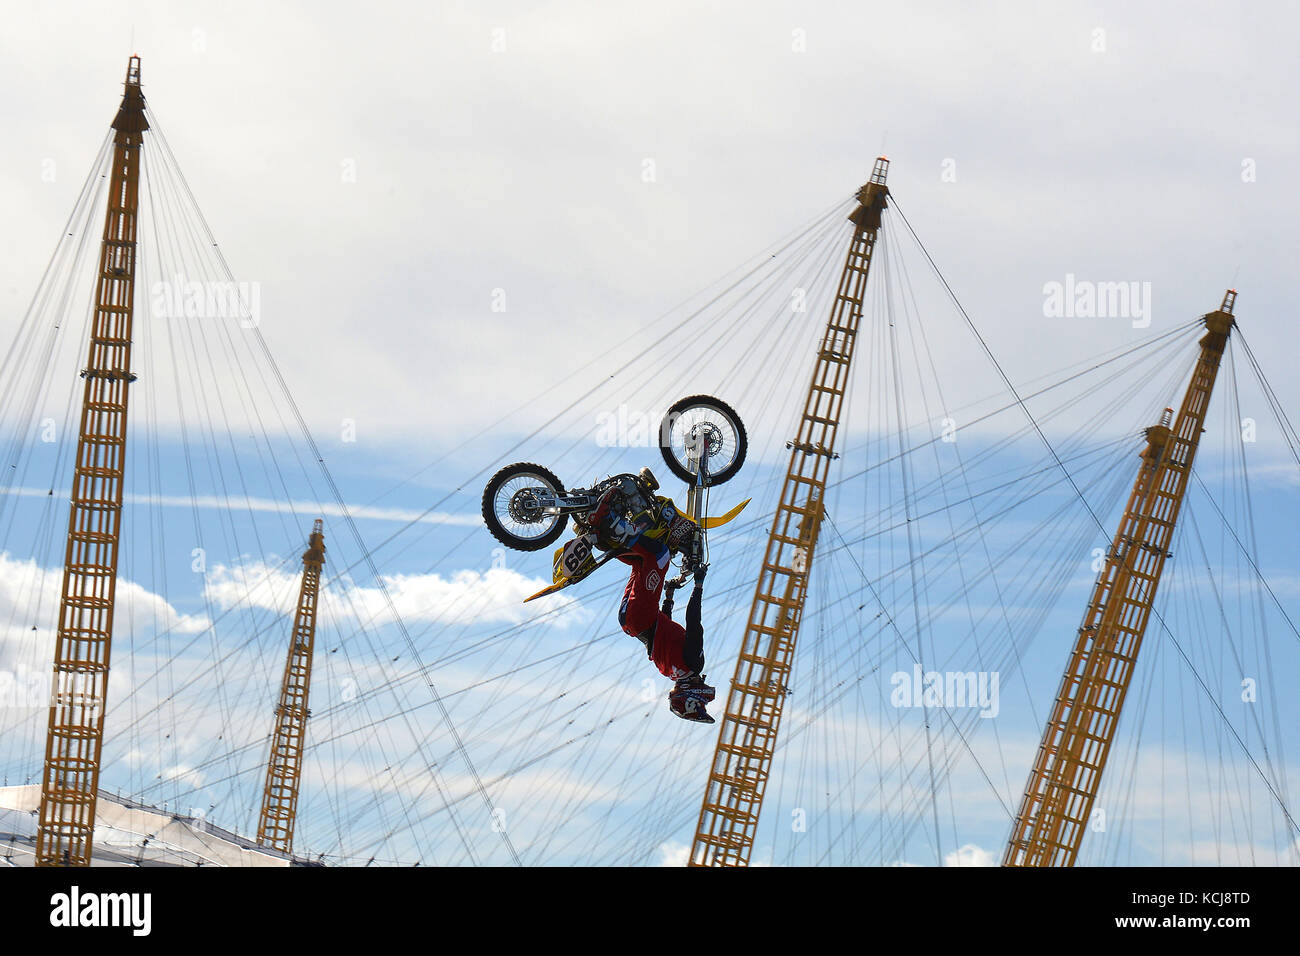 Nitro Circus ringleader and American professional motorsports competitor and stunt rider Travis Pastrana performs back-flips on a motorcycle between two floating barges in the River Thames, London, ahead of the opening at the Birmingham Arena in November of 'Nitro Circus: You Got This', which will visit 10 cities in six countries across the continent. Stock Photo